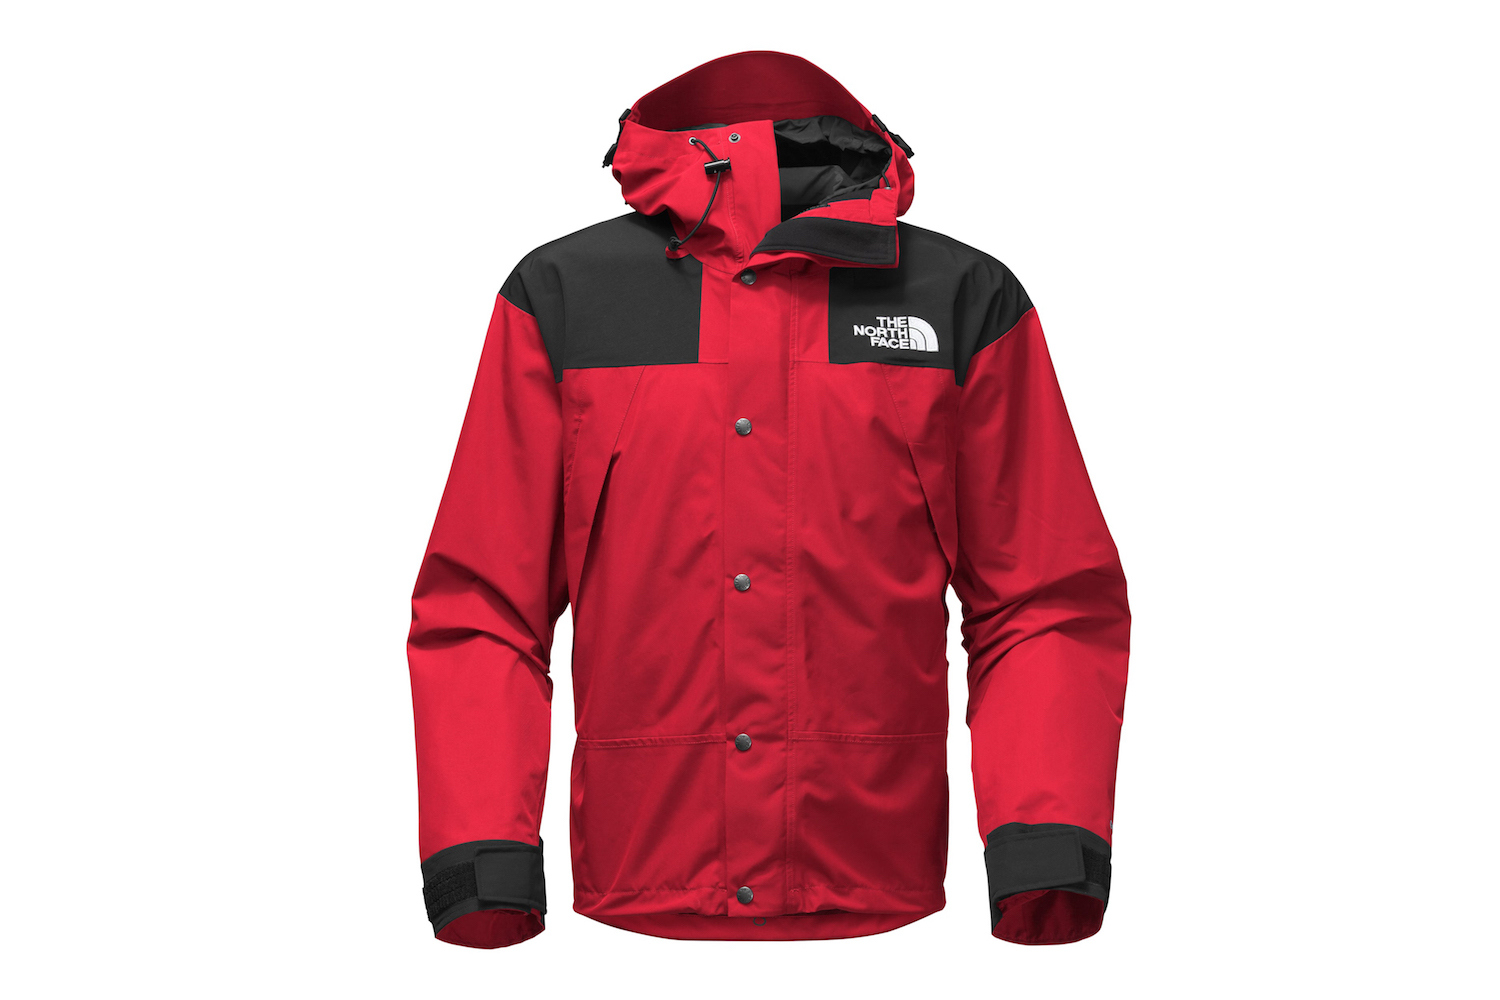 THE NORTH FACE 1990 ICONIC MOUNTAIN